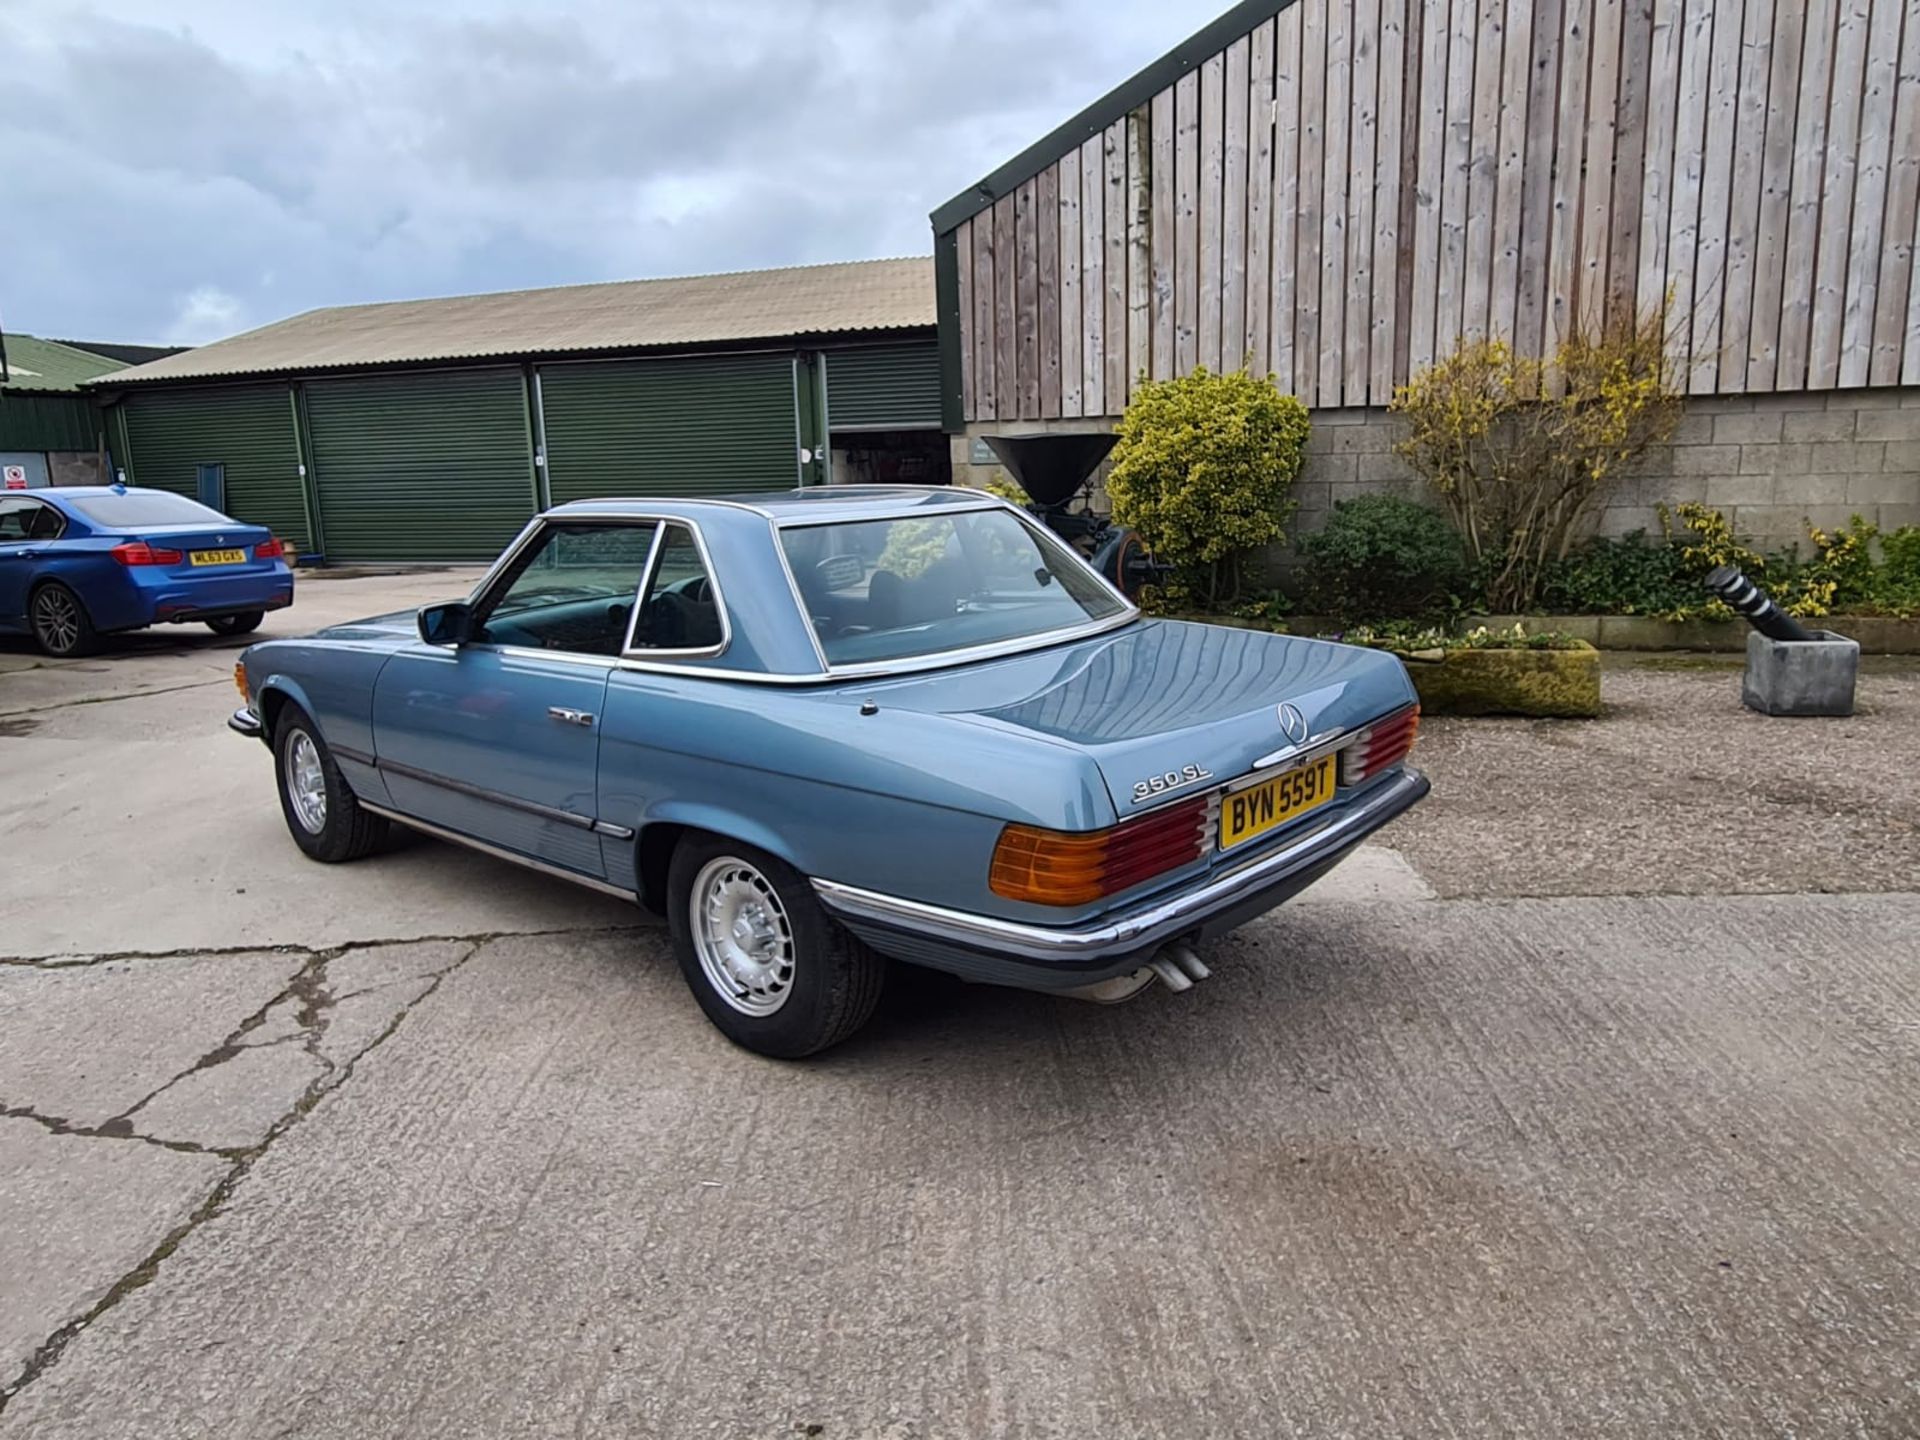 Stunning 1979 Mercedes Benz SL350 V8 With Factory Hardtop - Restored in 2018 - Image 10 of 22